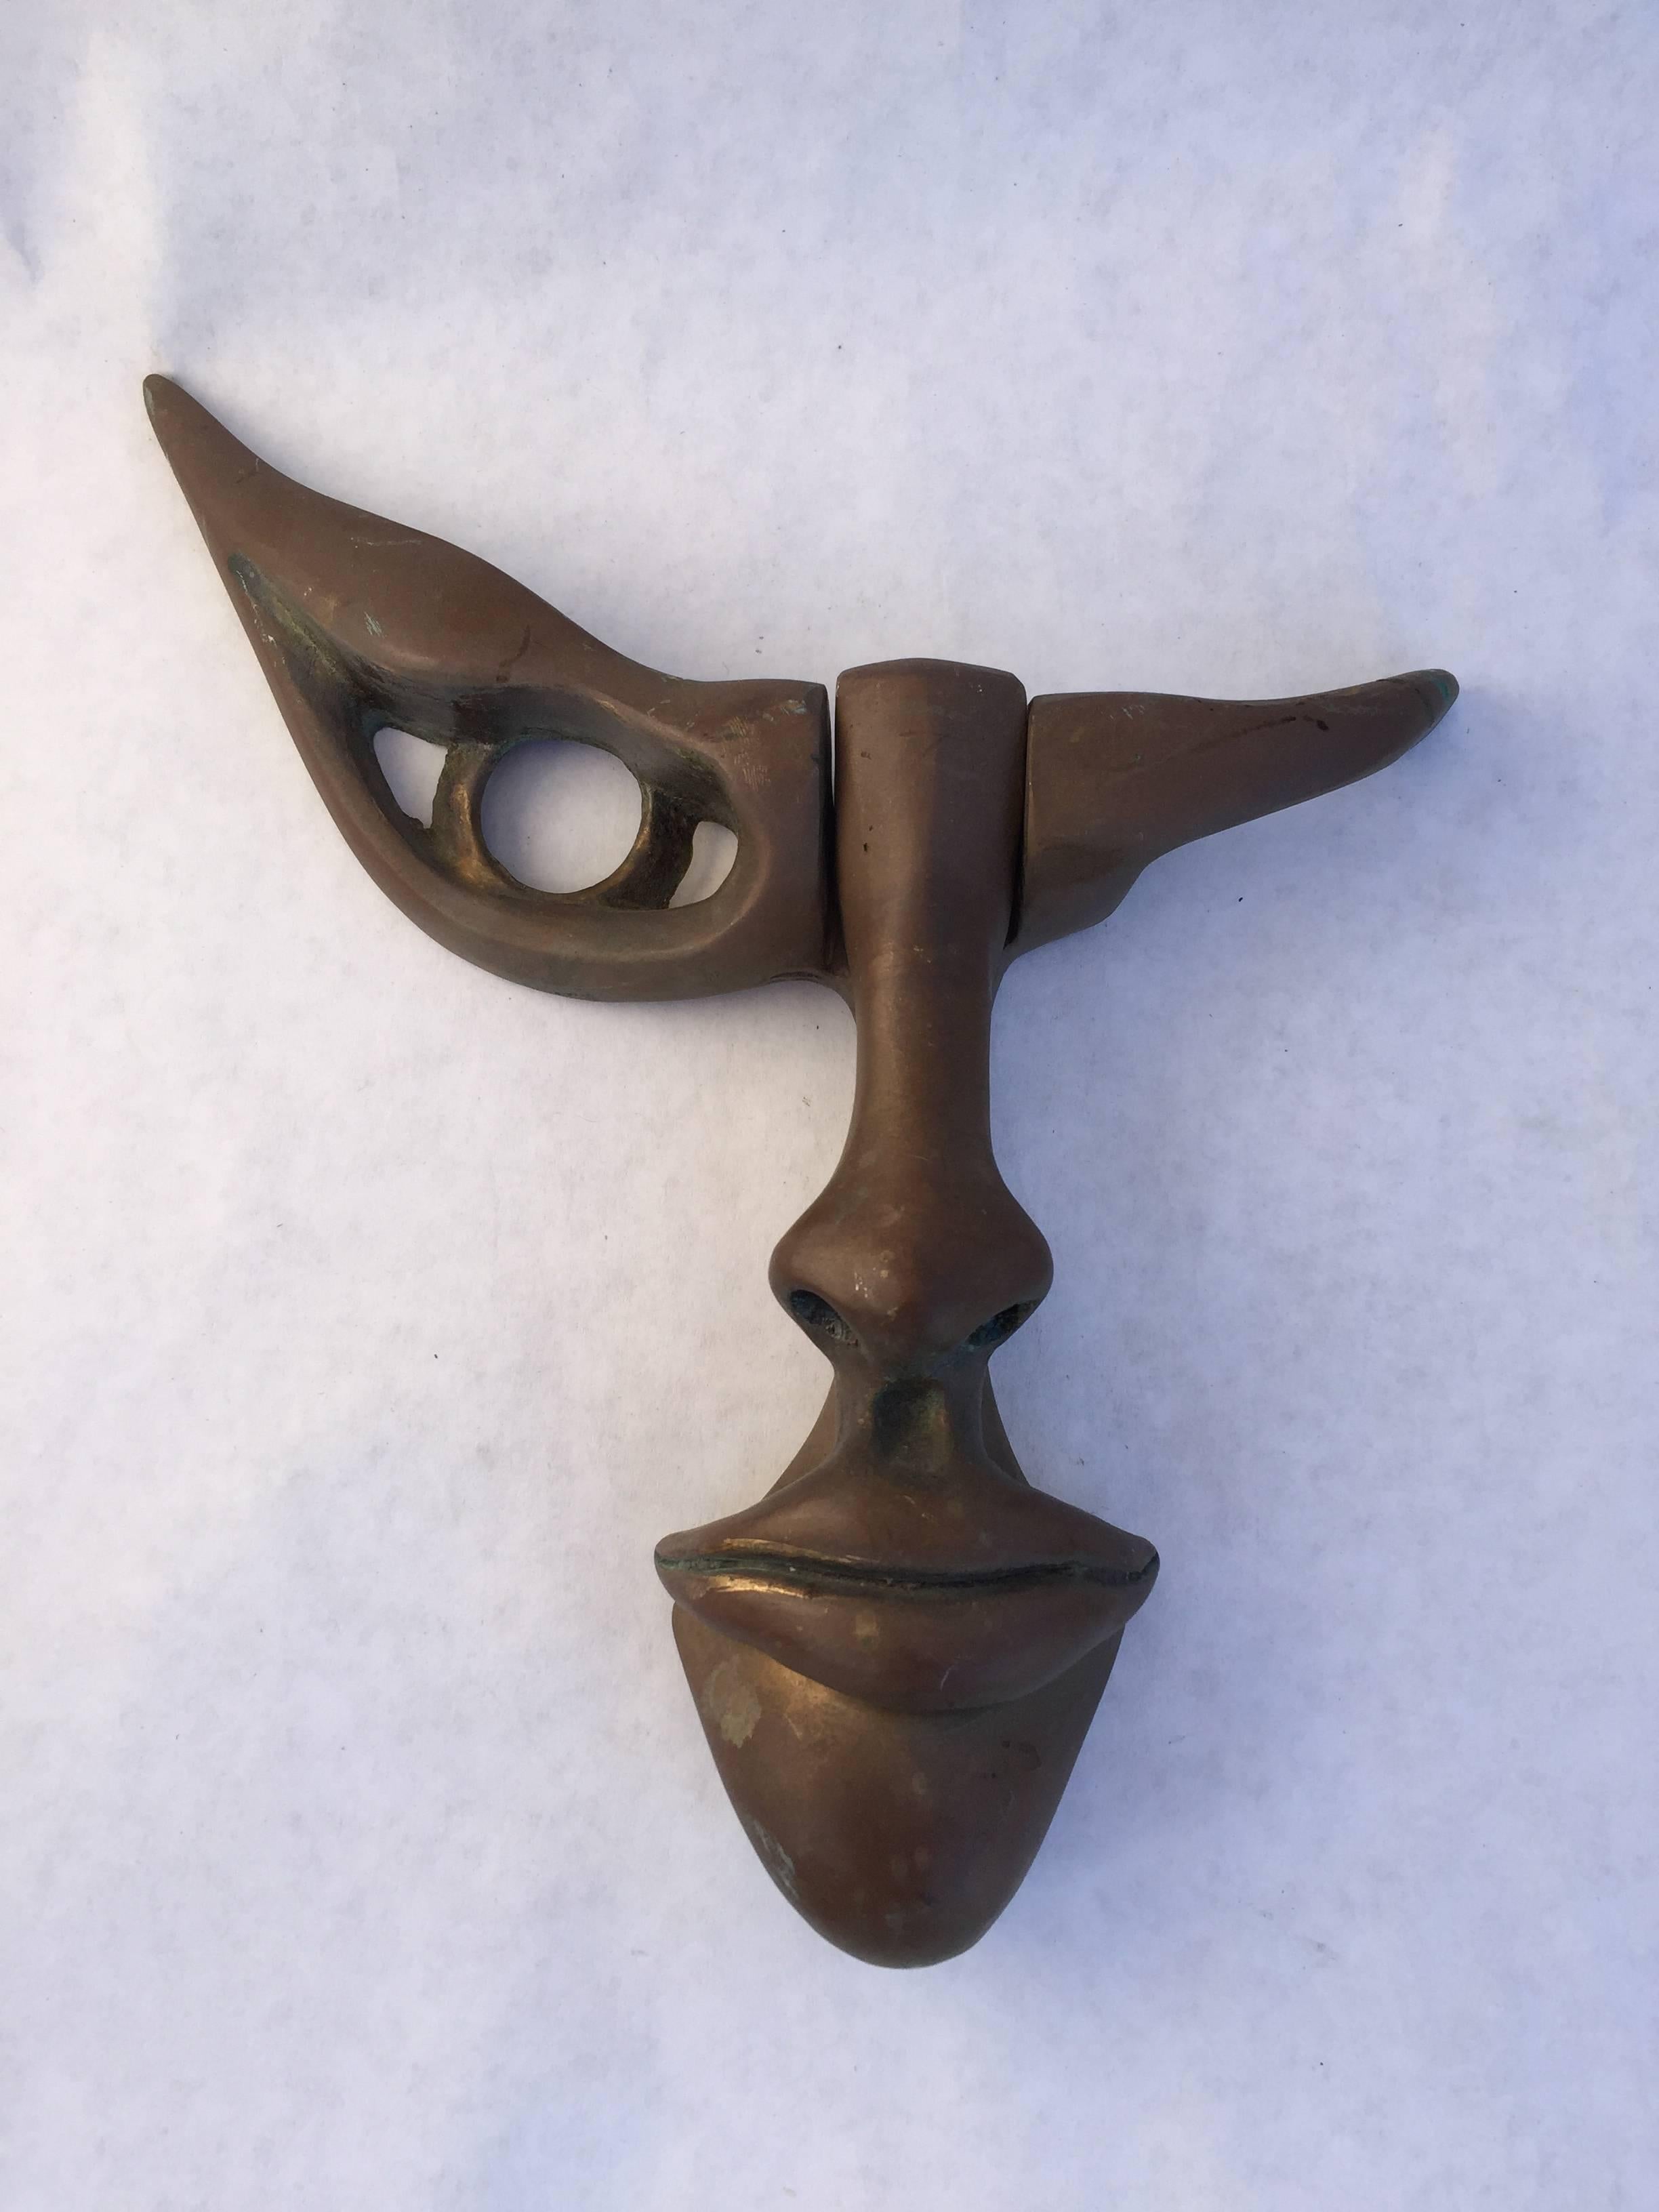 The cast bronze door knocker sets itself apart from every other piece of door hardware. Rich original mellow patina. Signed Cellura underneath the nose. Die stamped, 1996 (possibly the date of origin) and 326. The nose and lips strike the upper chin